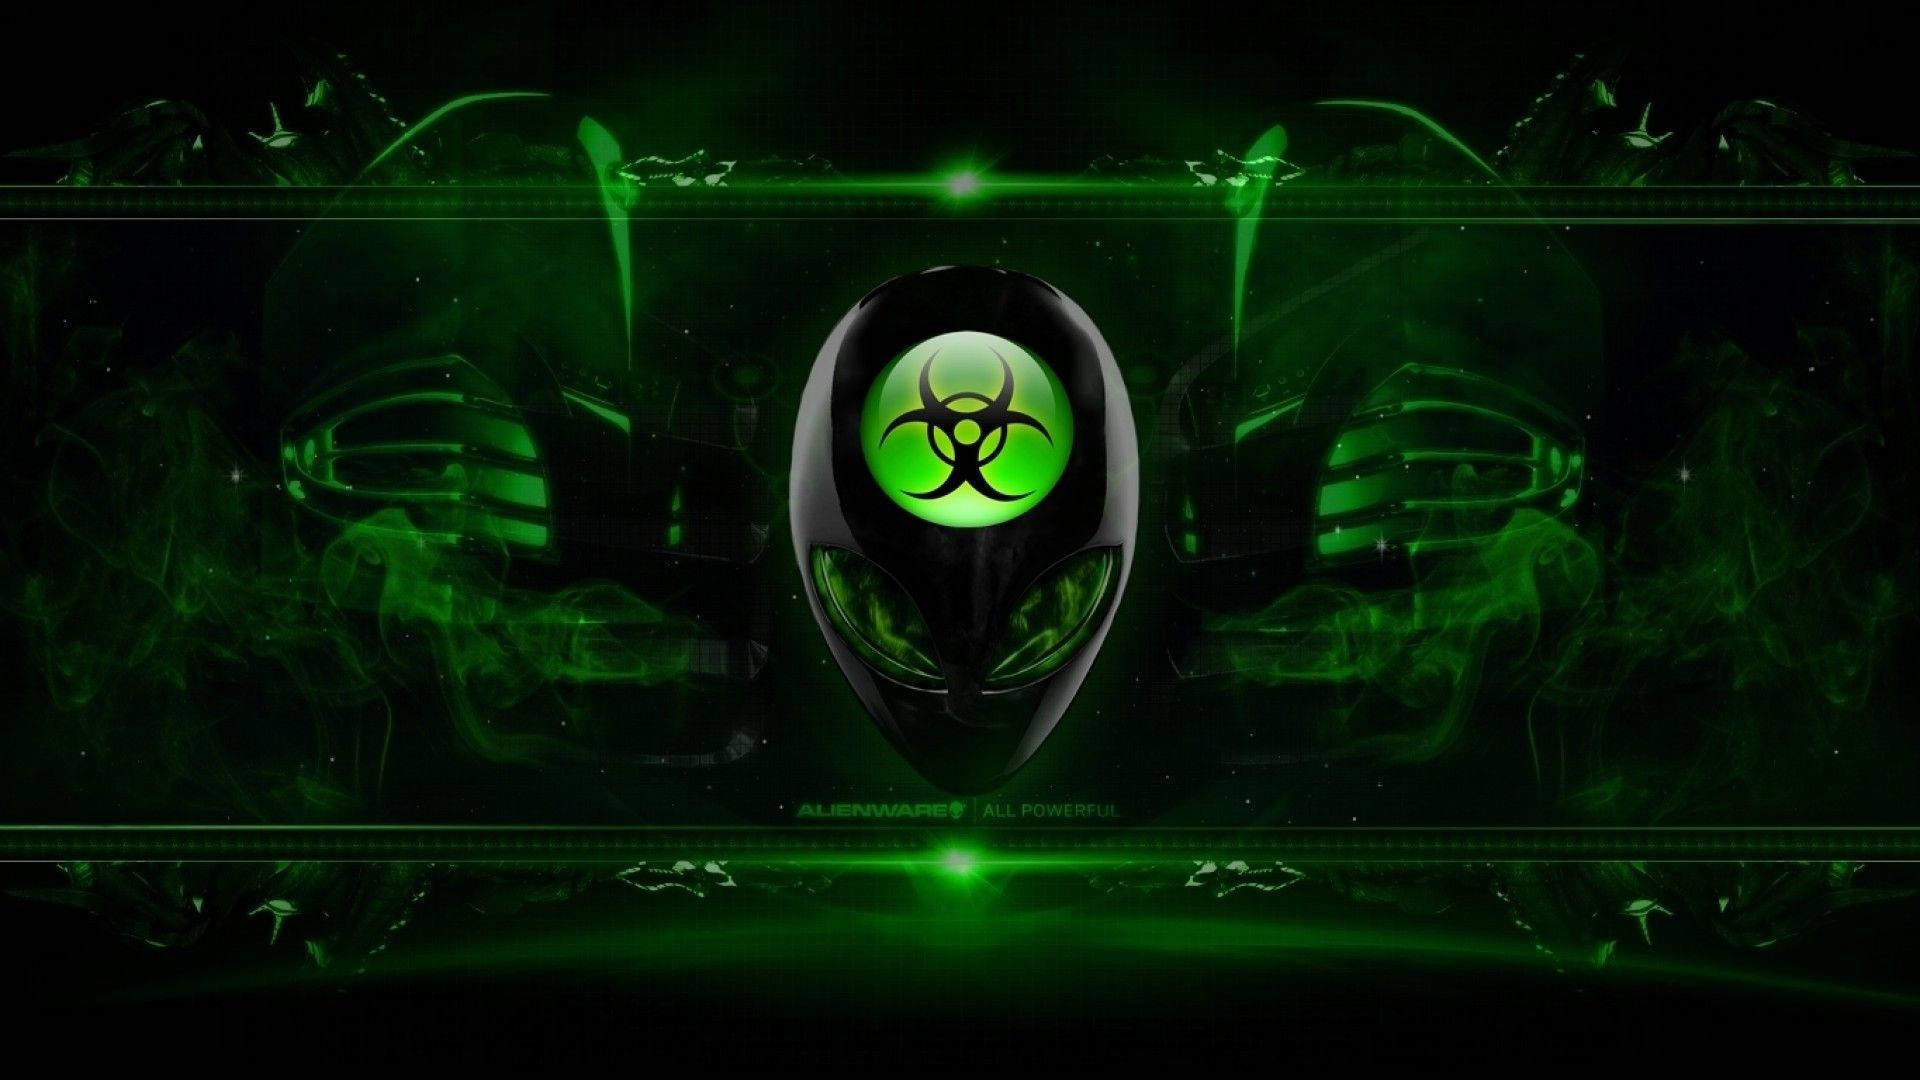 Explore a new world with Alienware Wallpaper